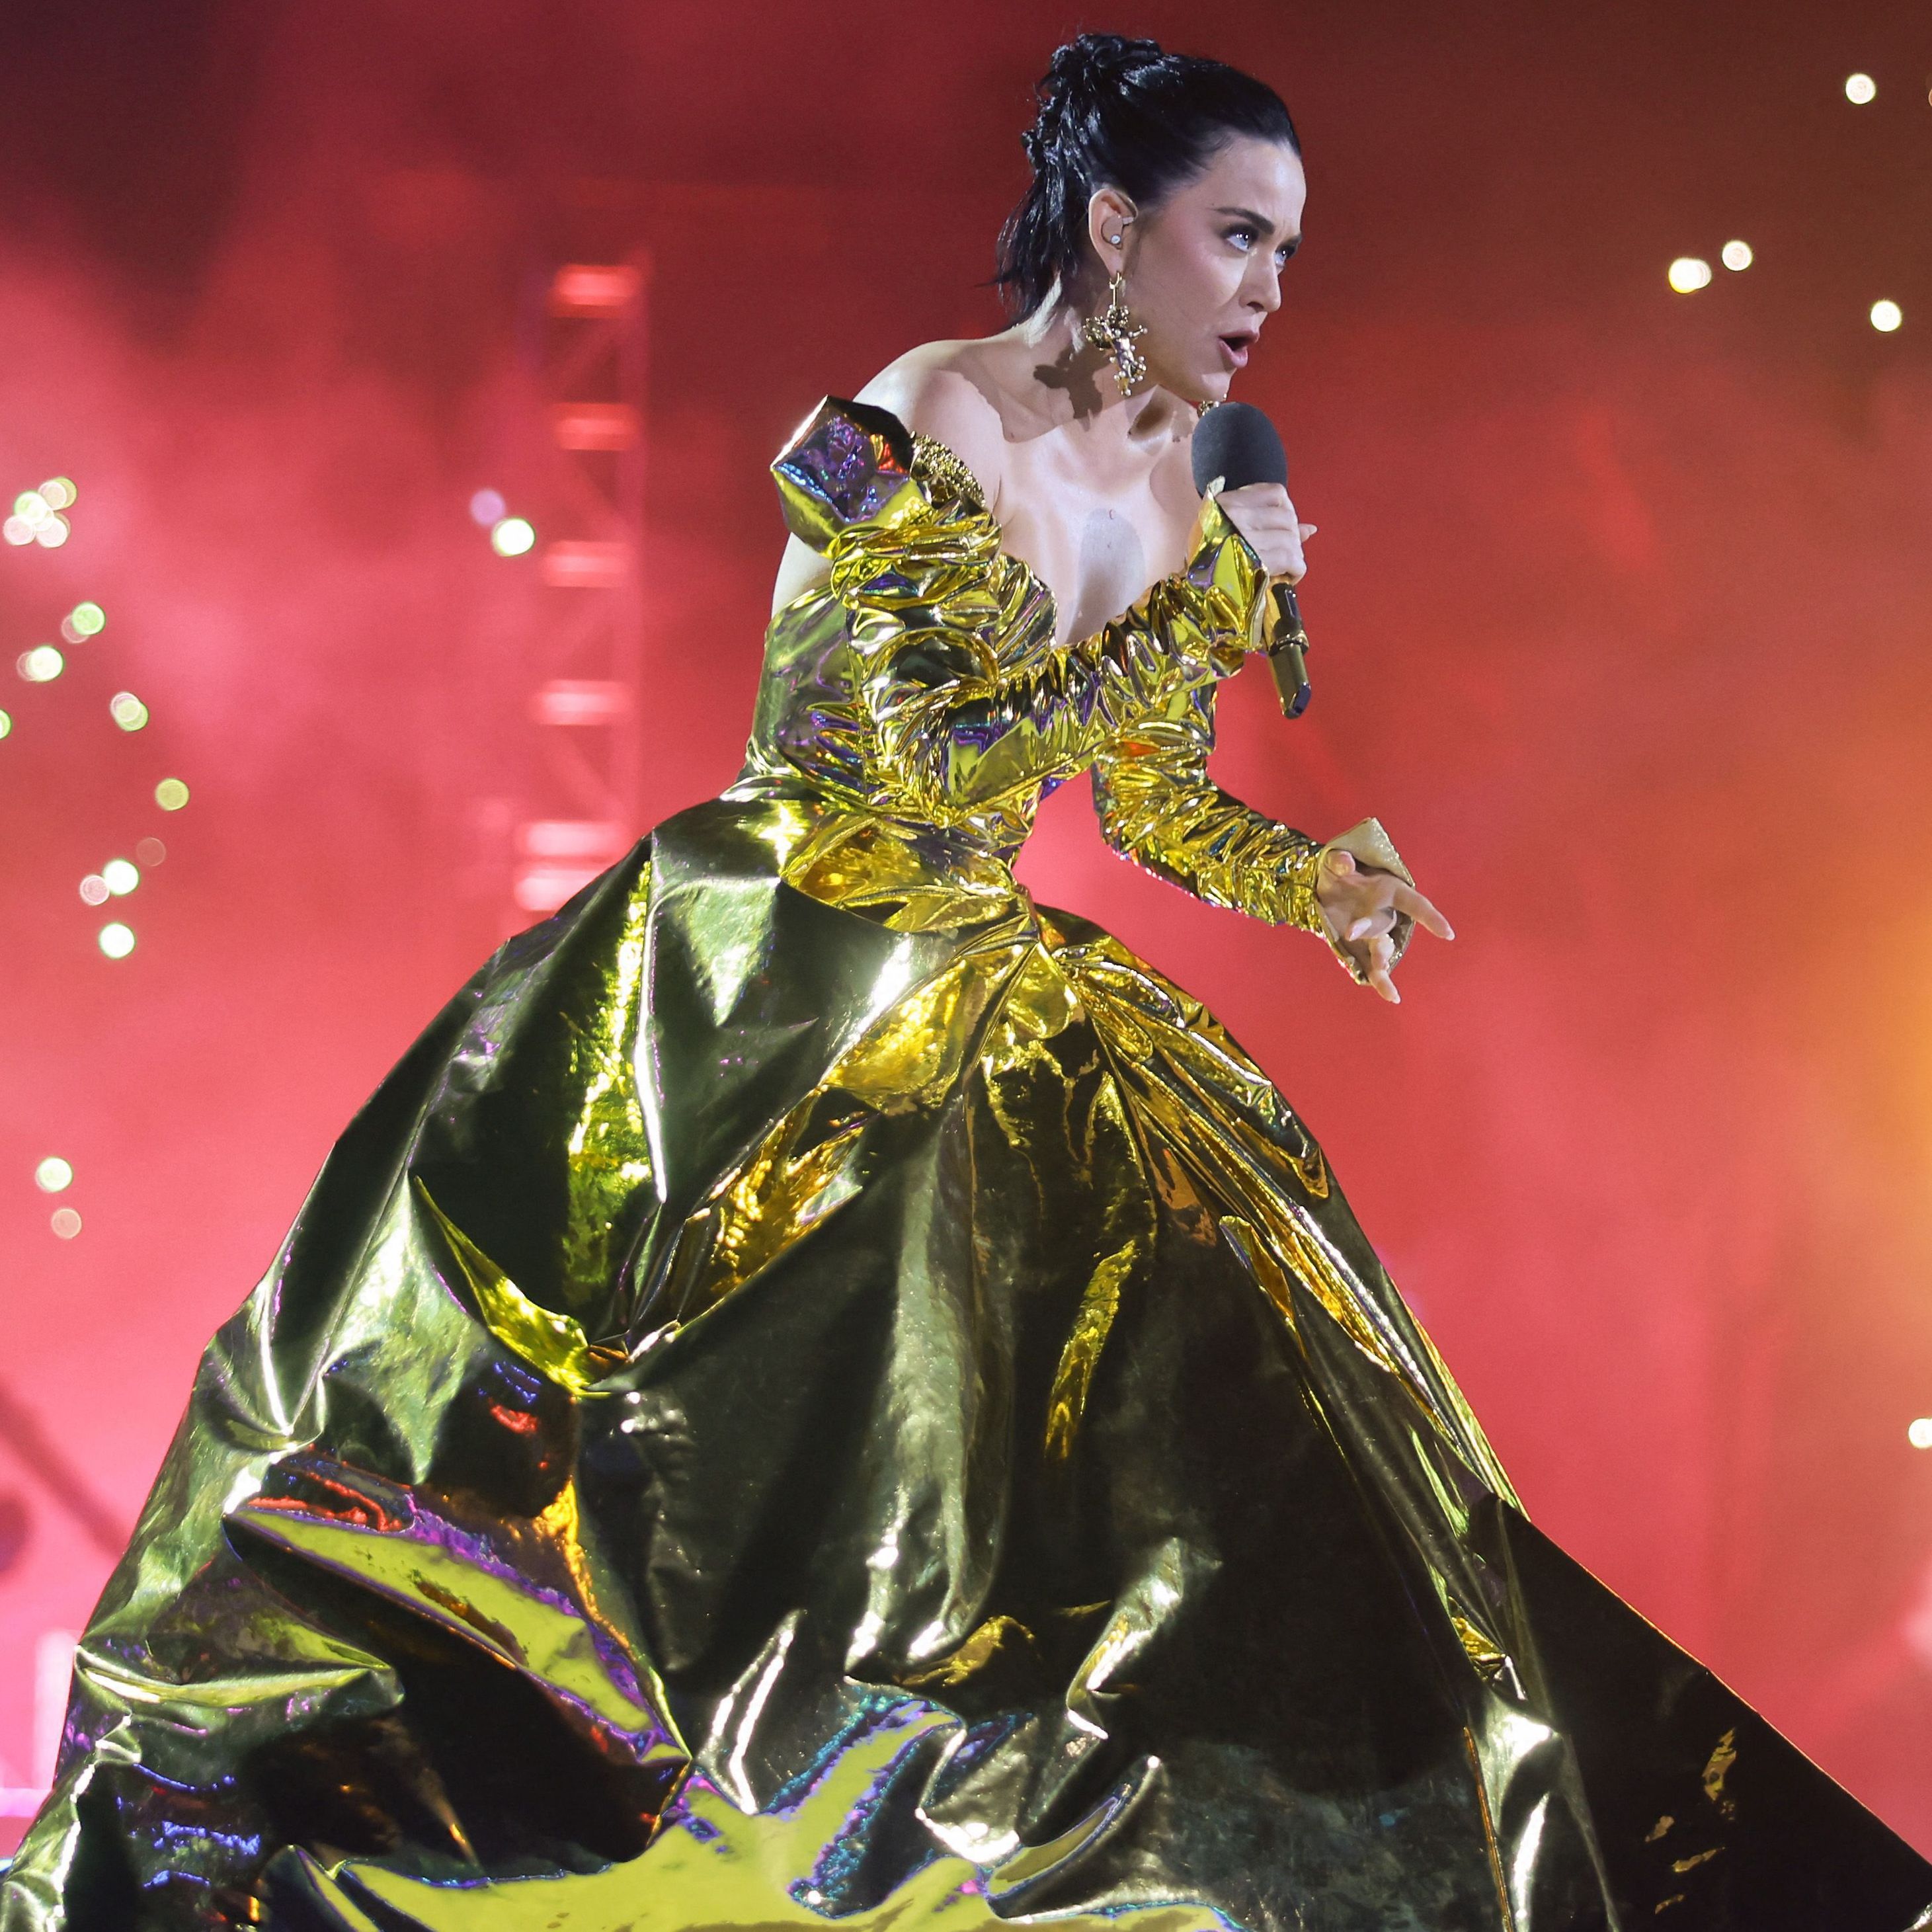 Katy Perry Showed Up for the Coronation Concert in a Metallic Gold Ball Gown–Watch Her Full Performance!